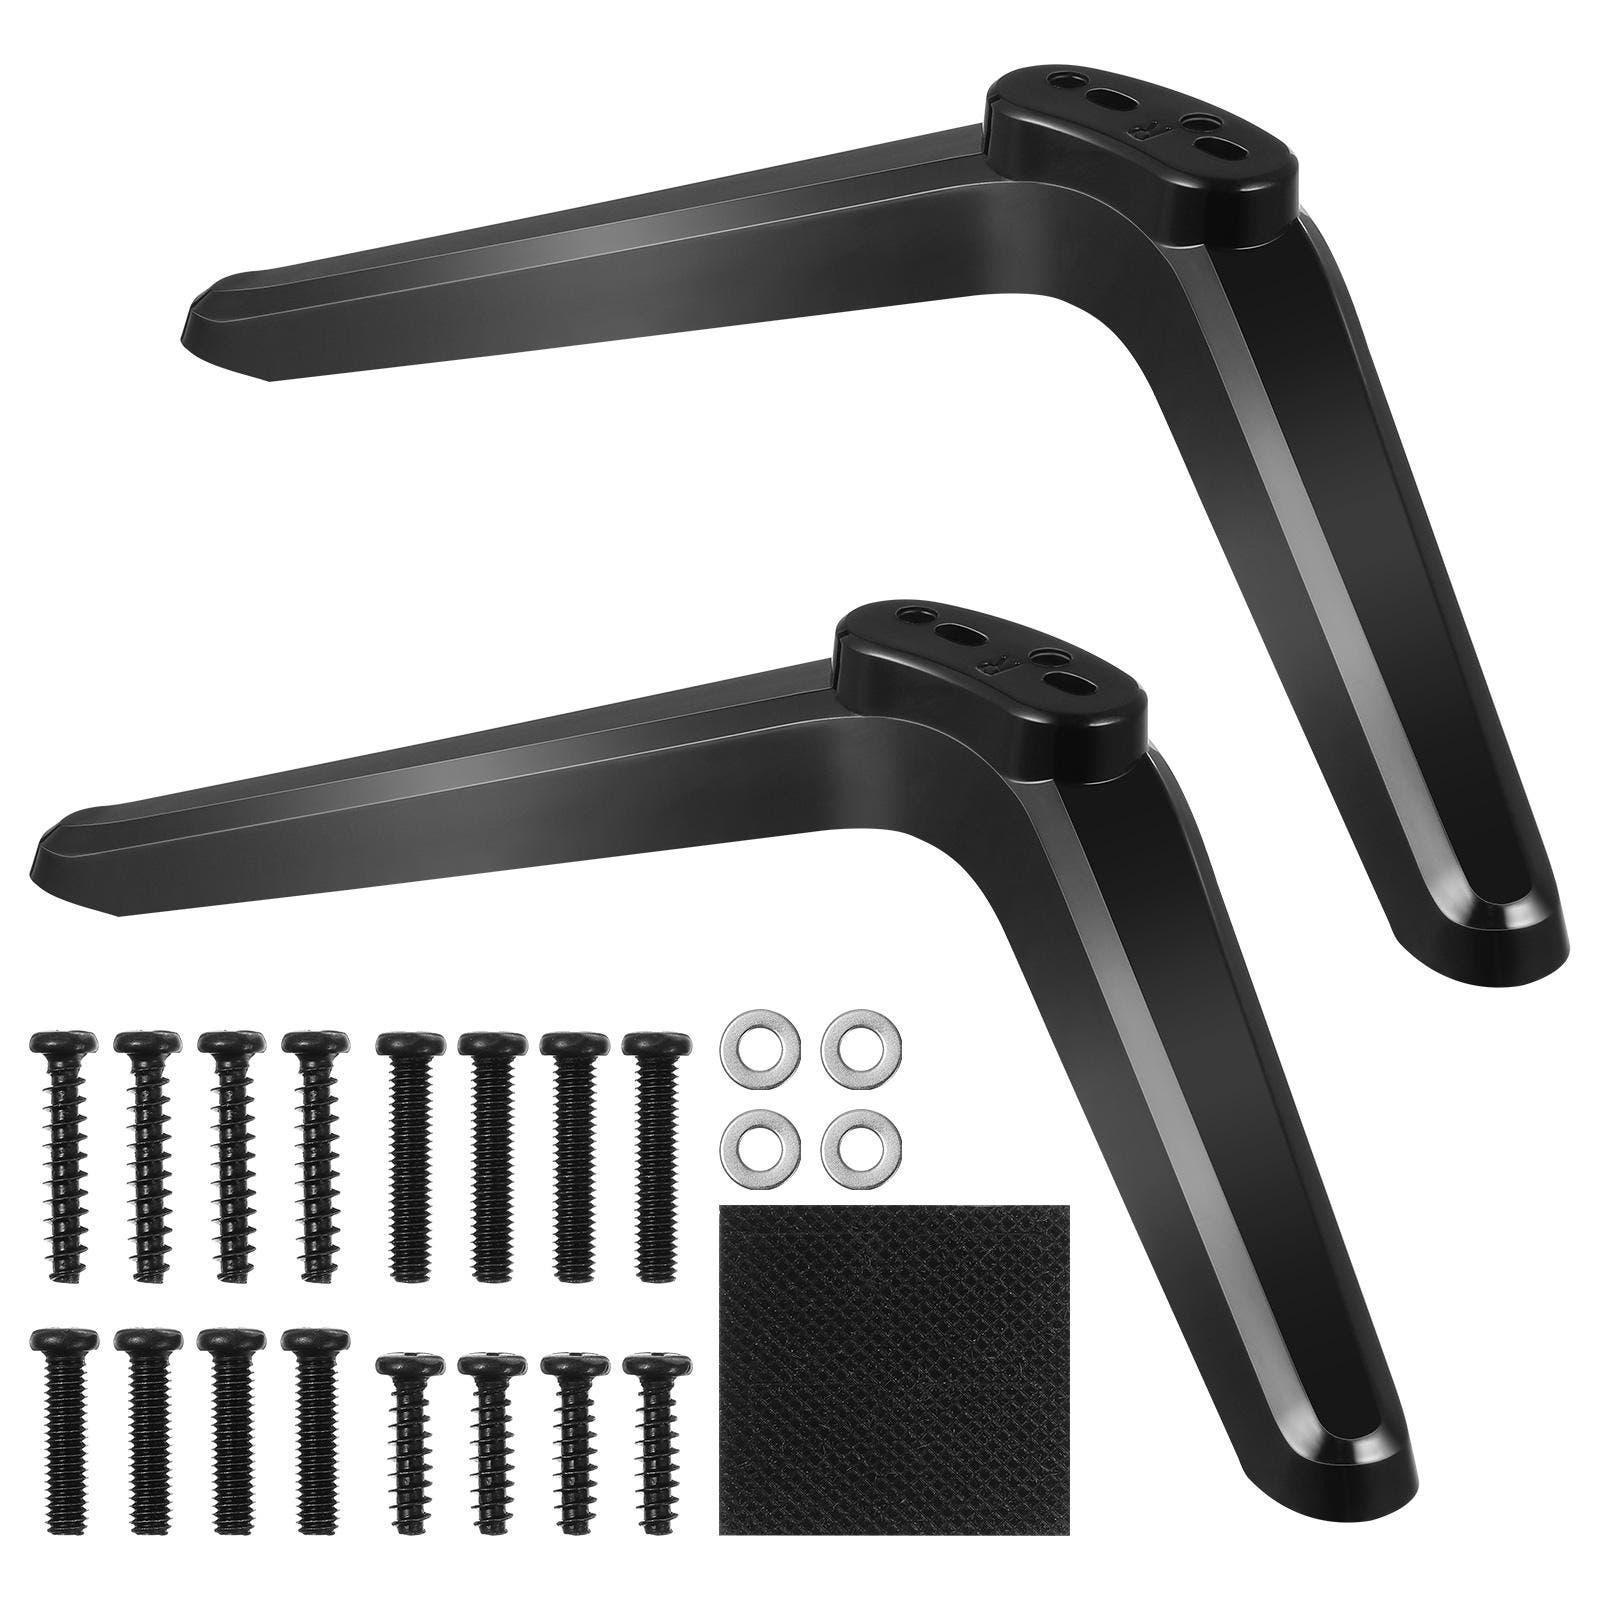 2 Pcs Tv Brackets Universal Tv Stand Base Holder Tv Mount Stands With Screws